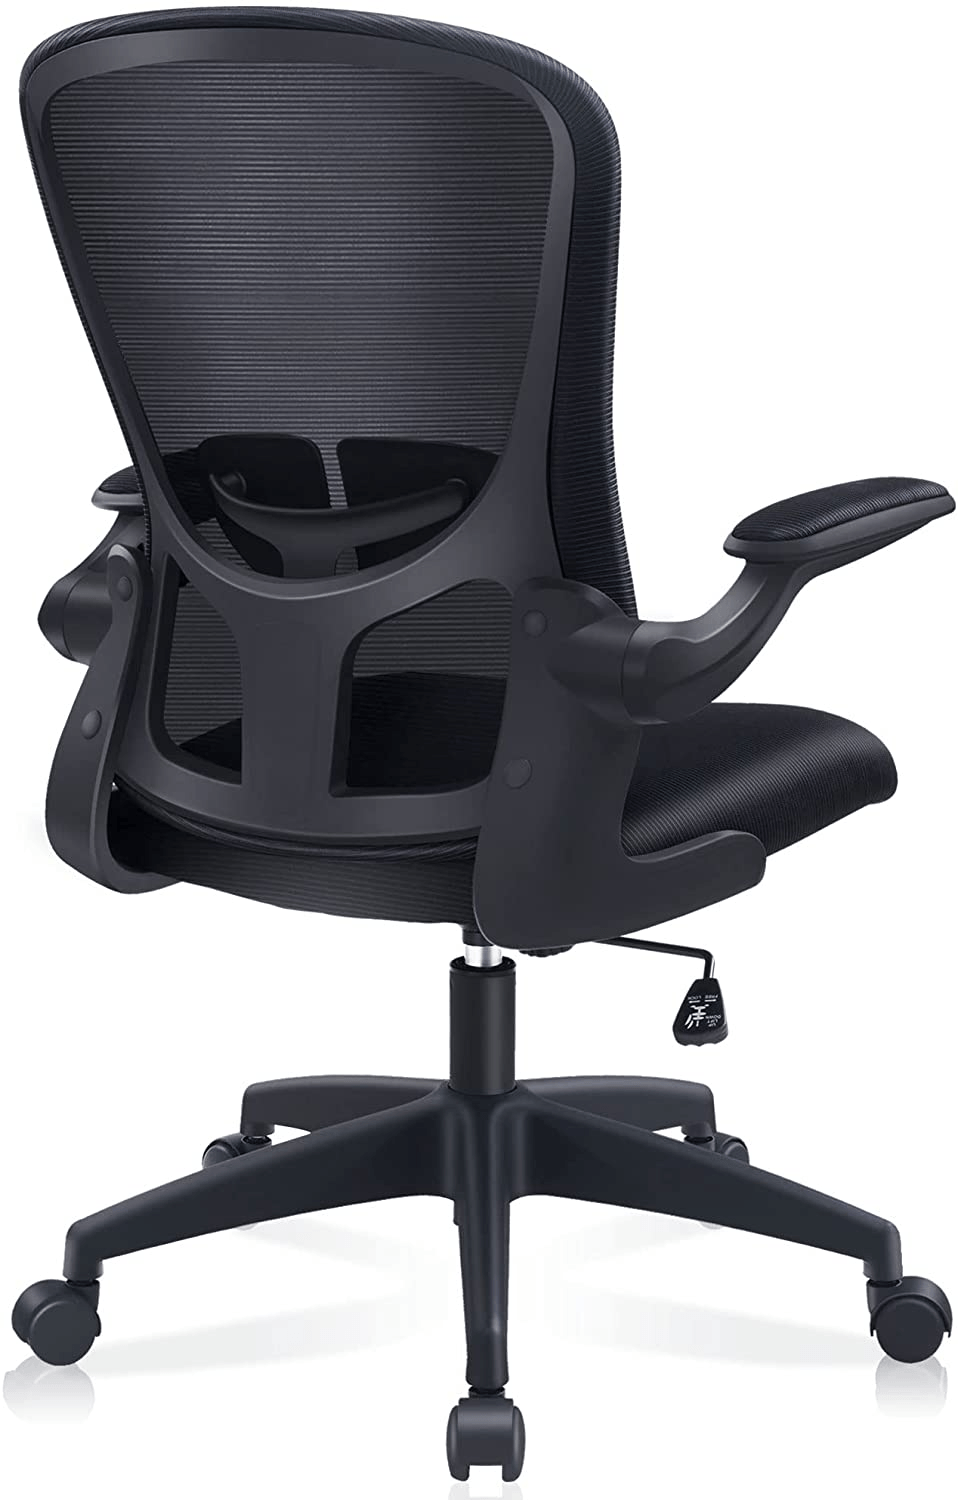 KERDOM Ergonomic Office Chair With Lumbar Support - Black/White